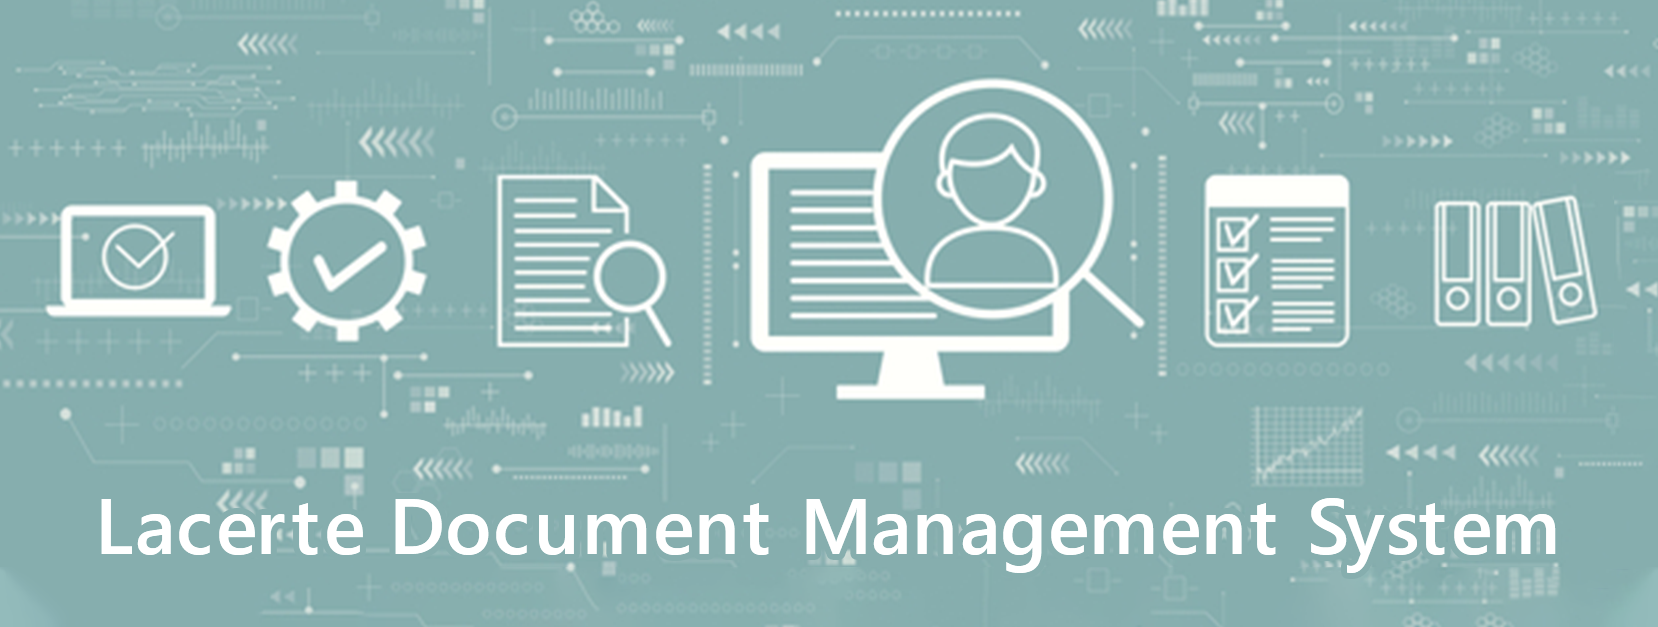 What is Lacerte Document Management System?